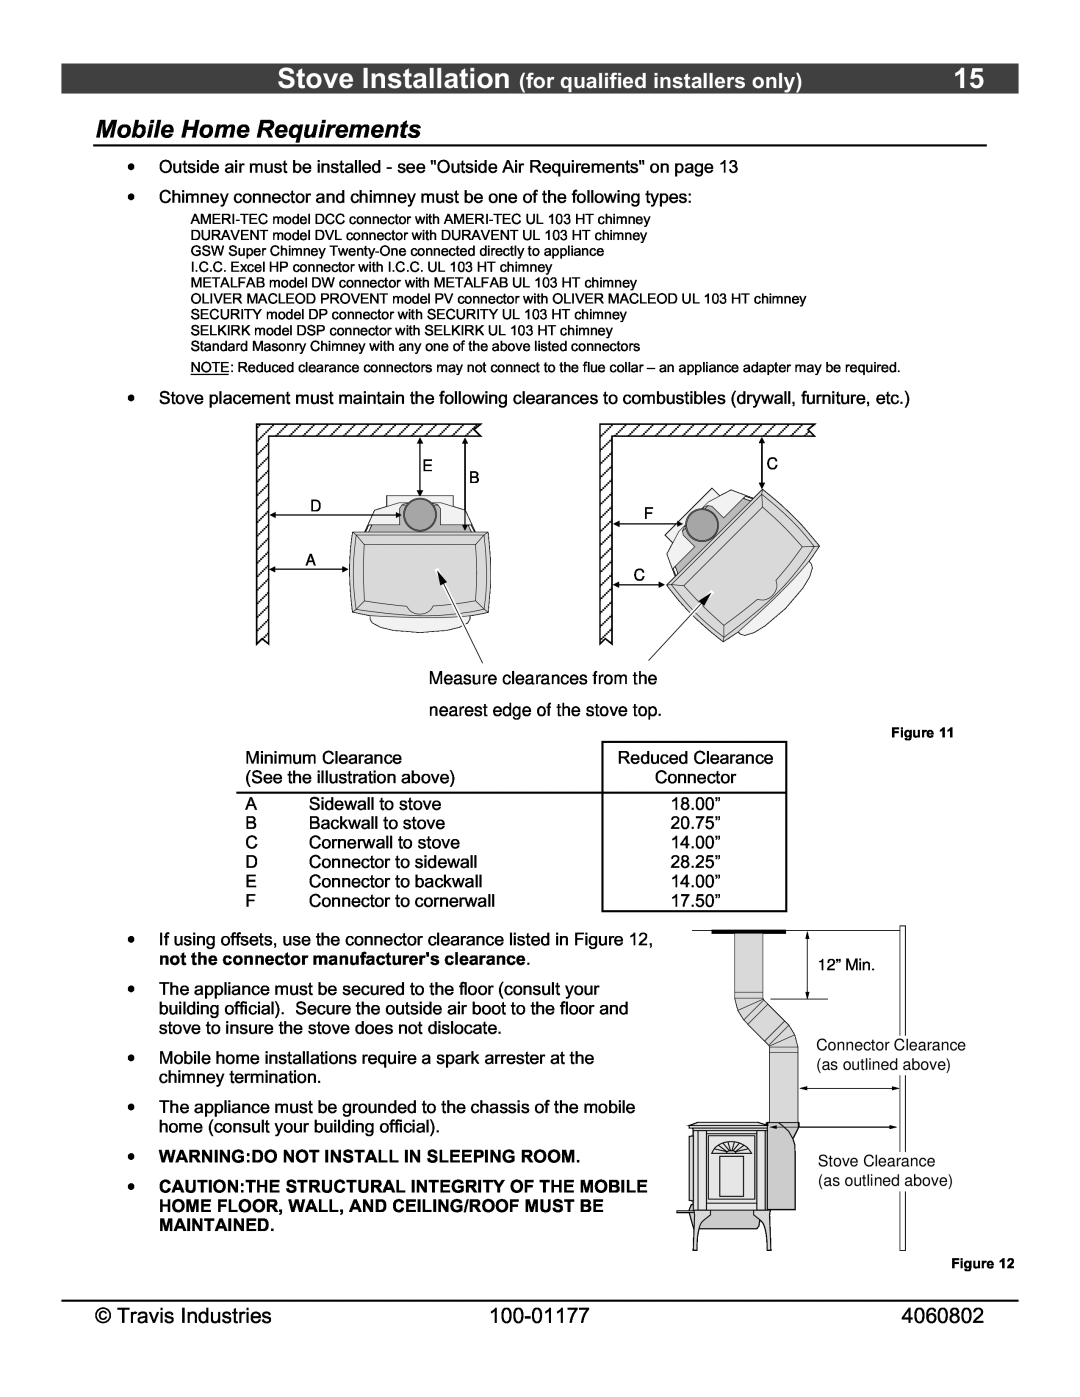 Lopi 028-S-75-2 owner manual Mobile Home Requirements, Stove Installation for qualified installers only 